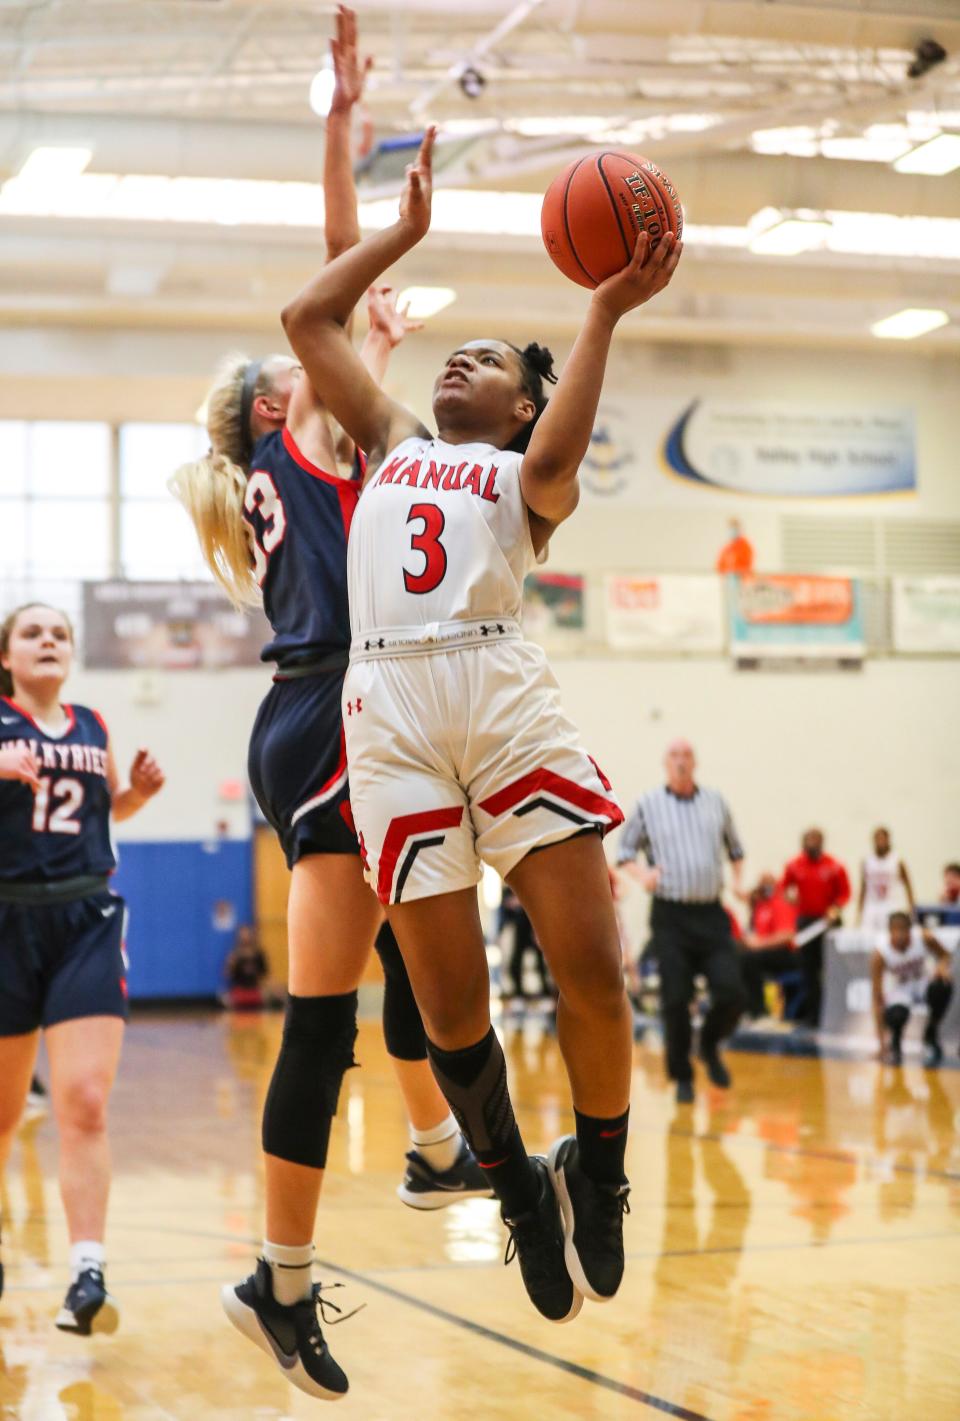 Manual's Jakayla Thompson scores against Sacred Heart's Josie Gilvin at the Girls Seventh Regional semifinal at Valley High School. March 26, 2021